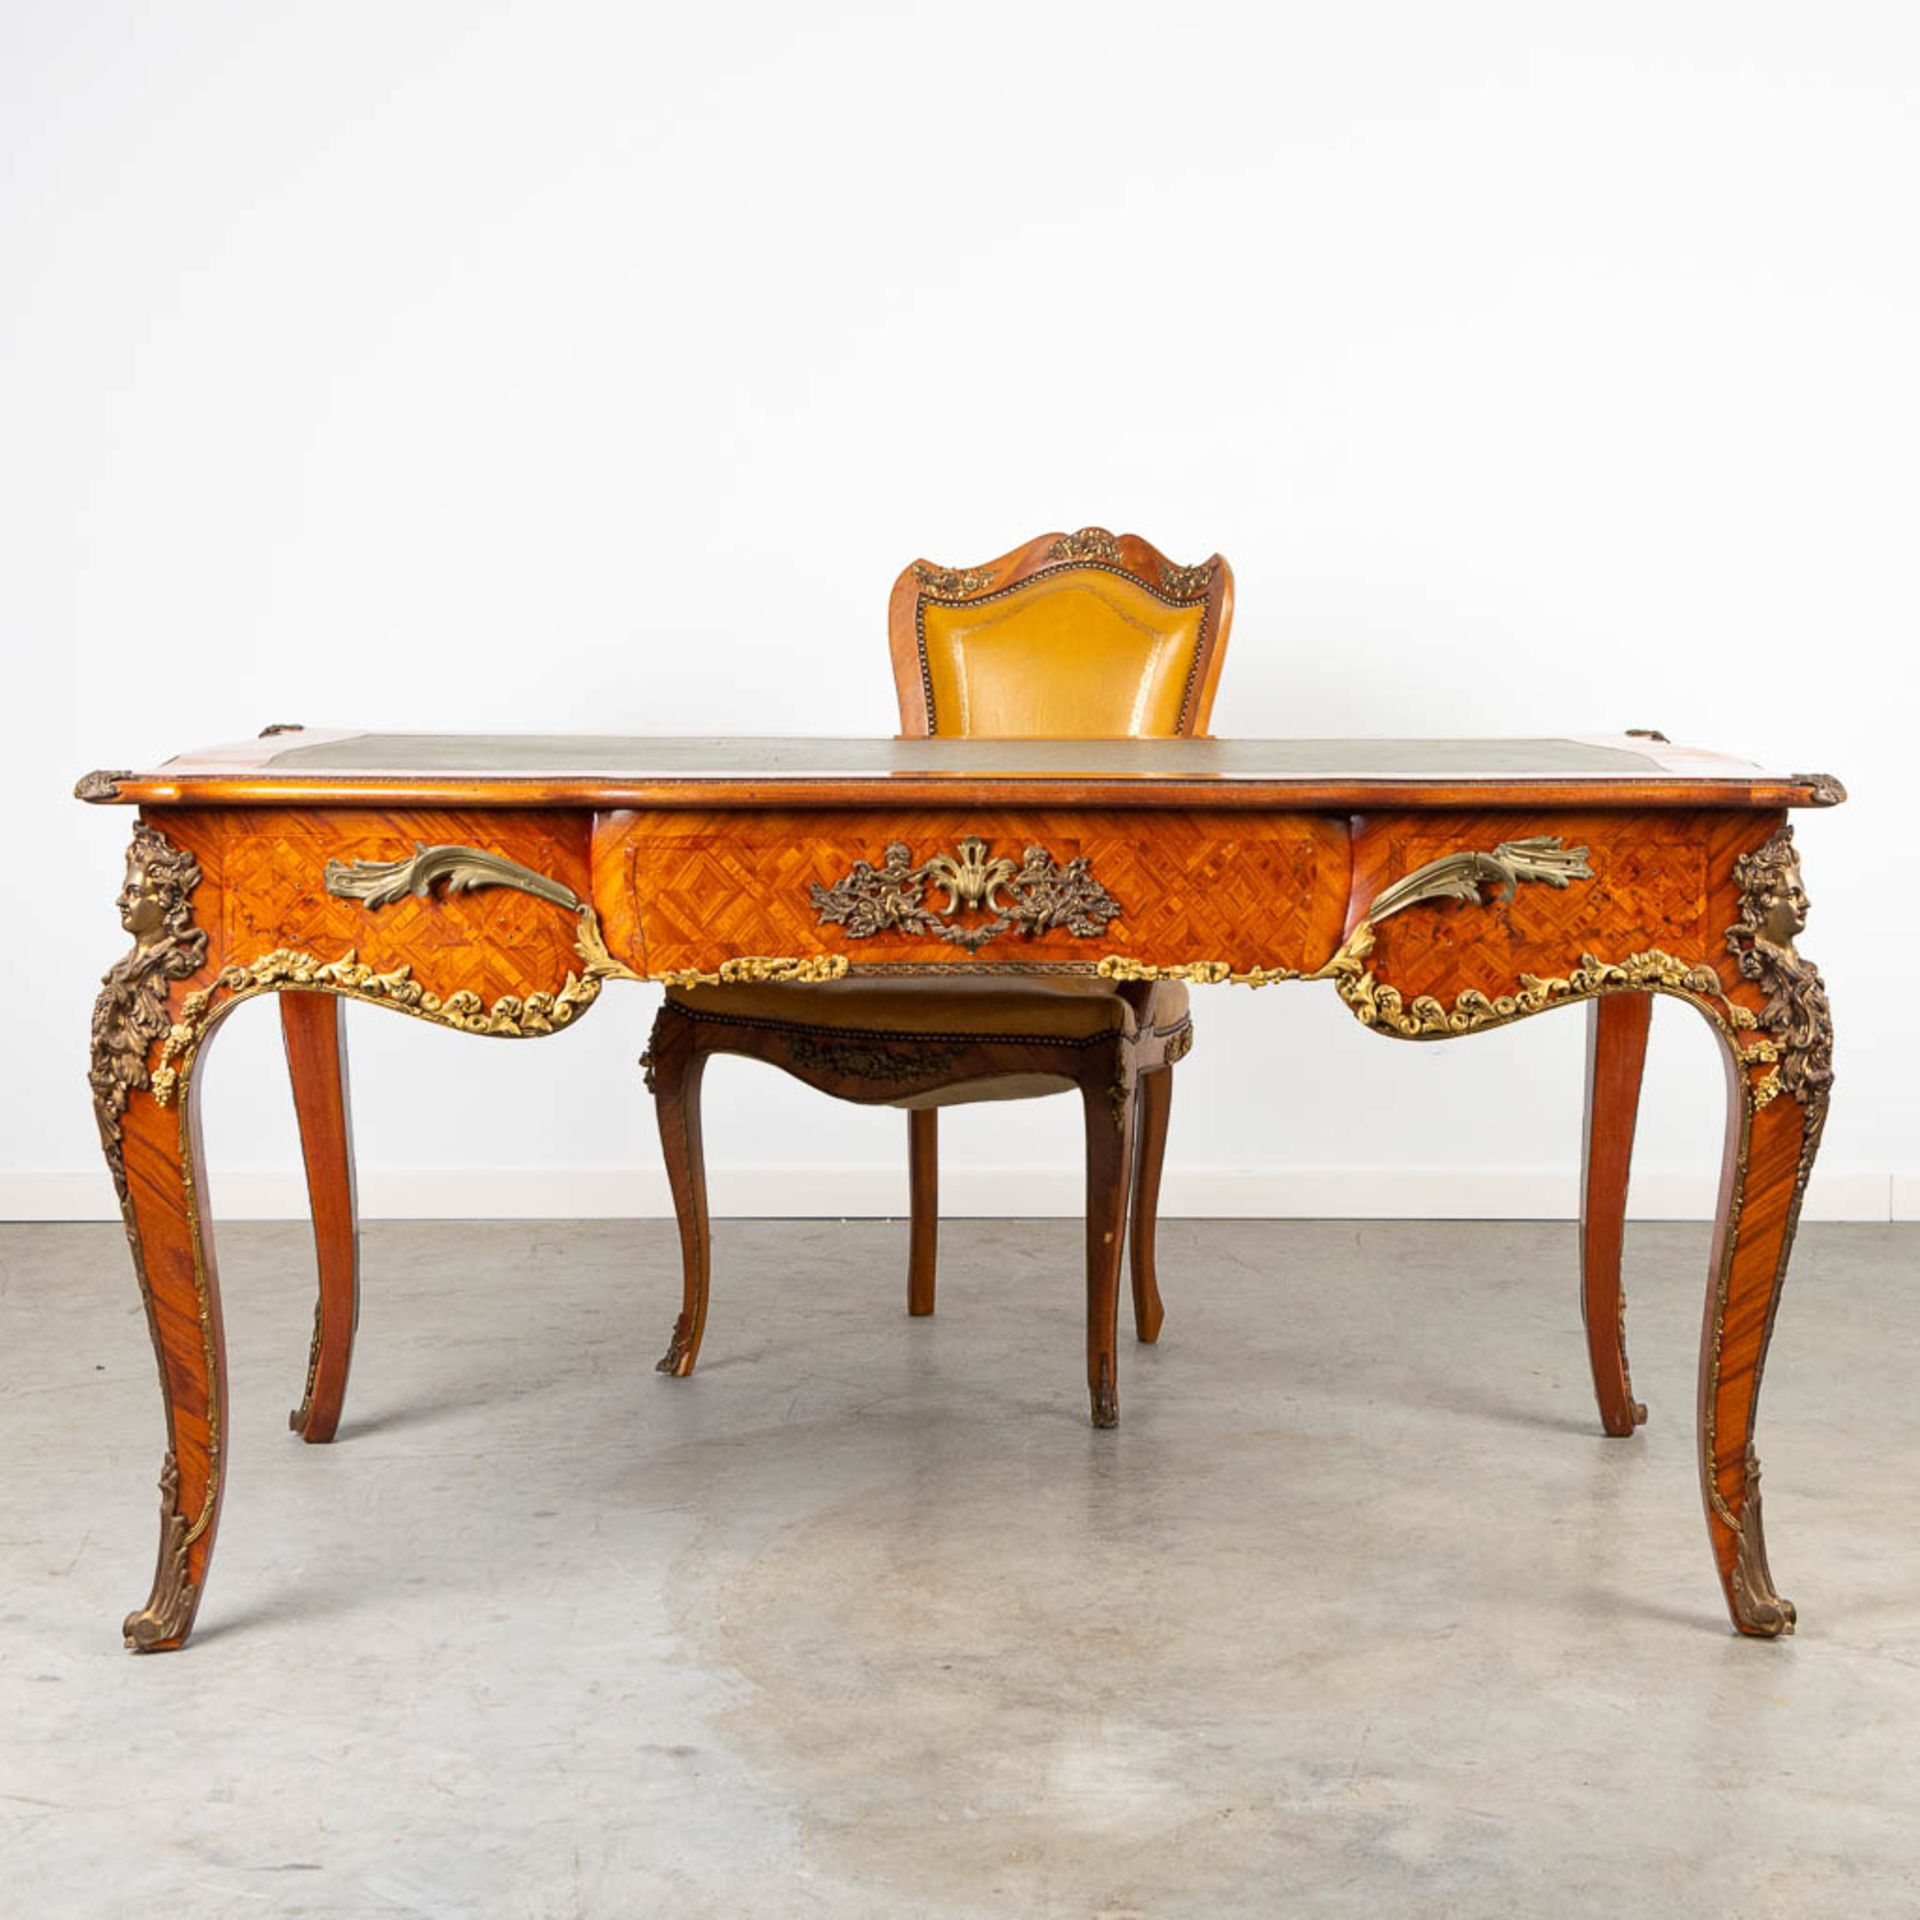 A desk and chair, mounted with bronze in Louis XV style and finished with marquetry bronze and leath - Image 3 of 18